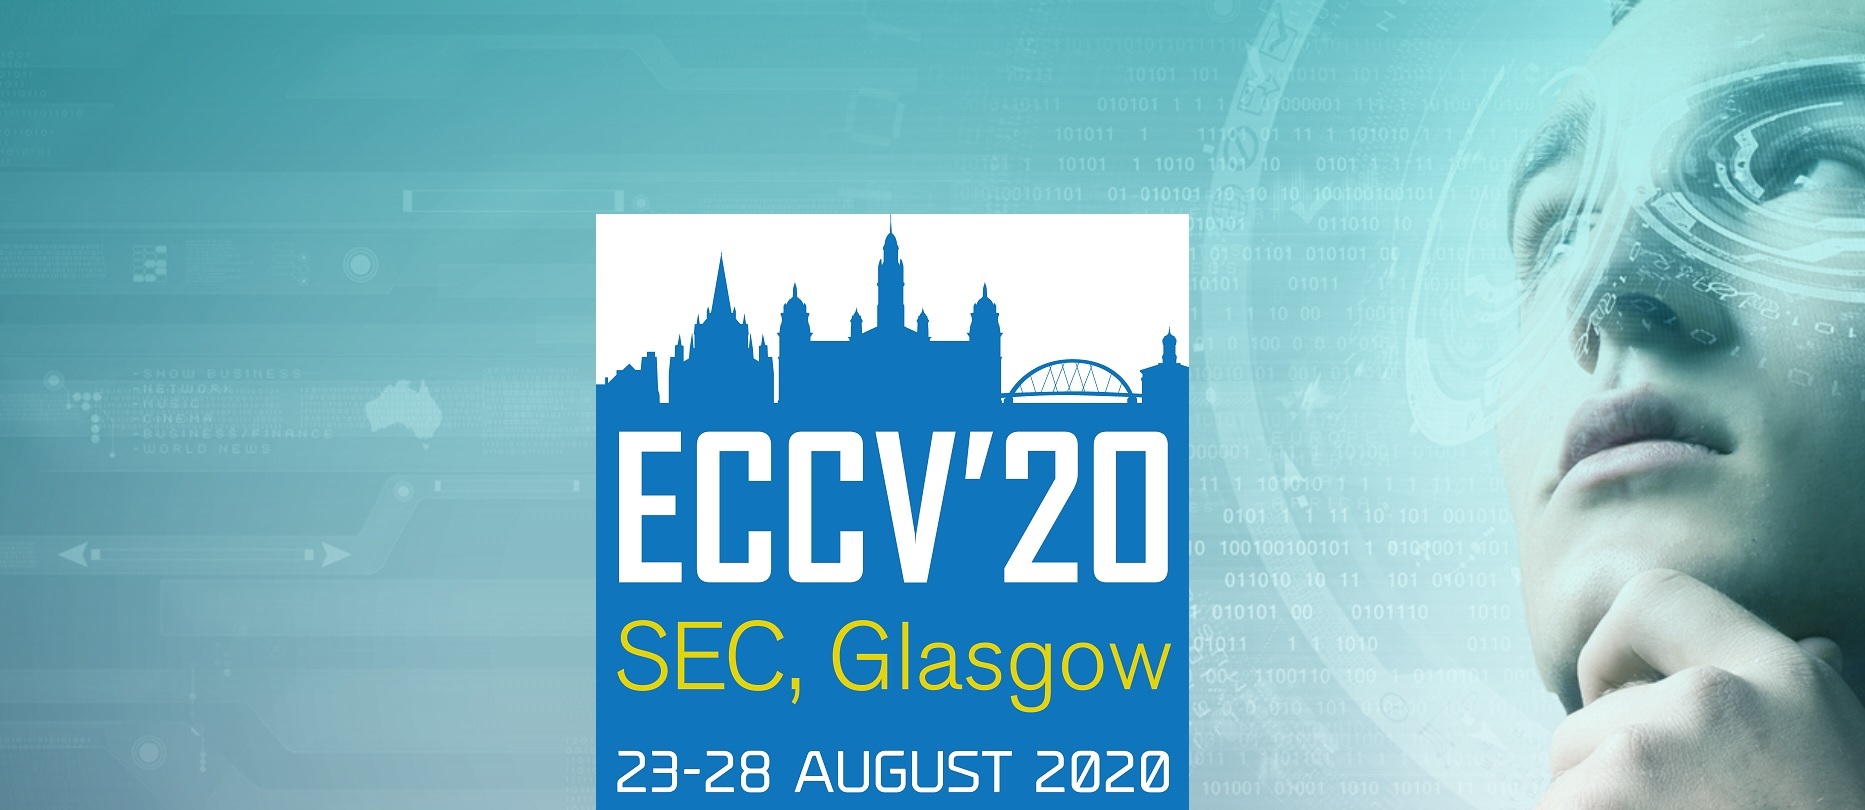 European Conference on Computer Vision 2020